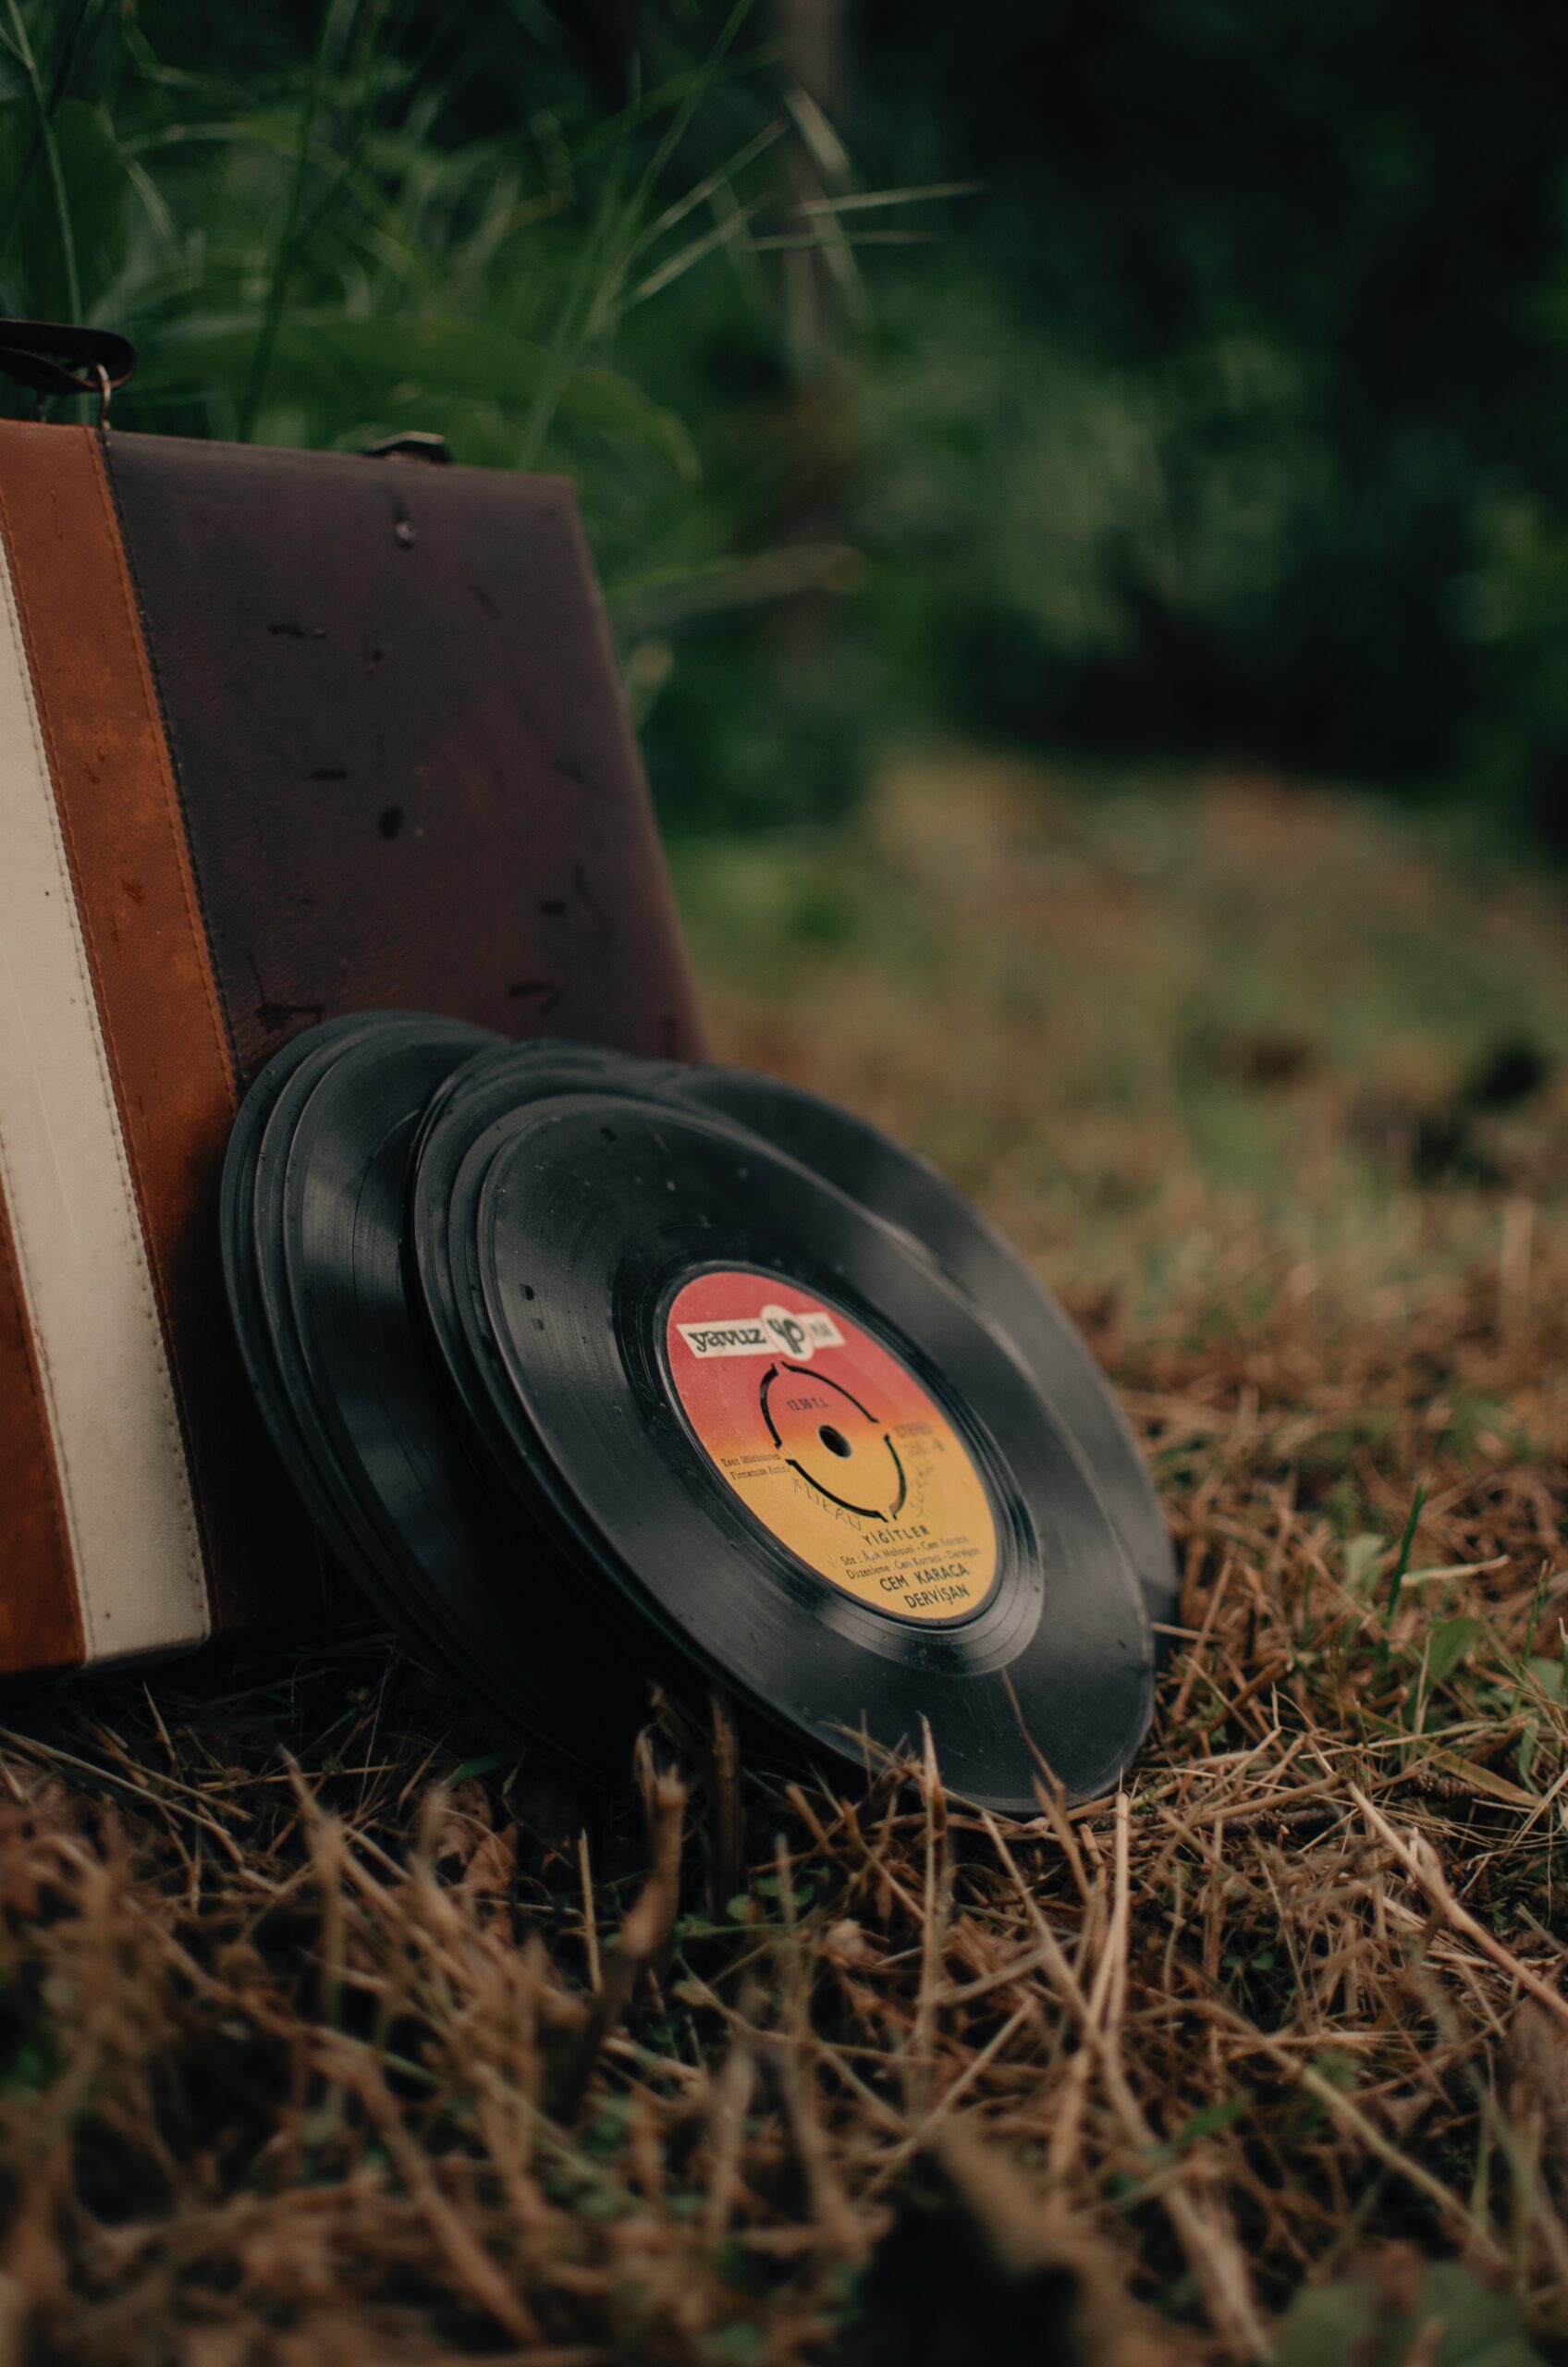 A pile of vinyls on grass image